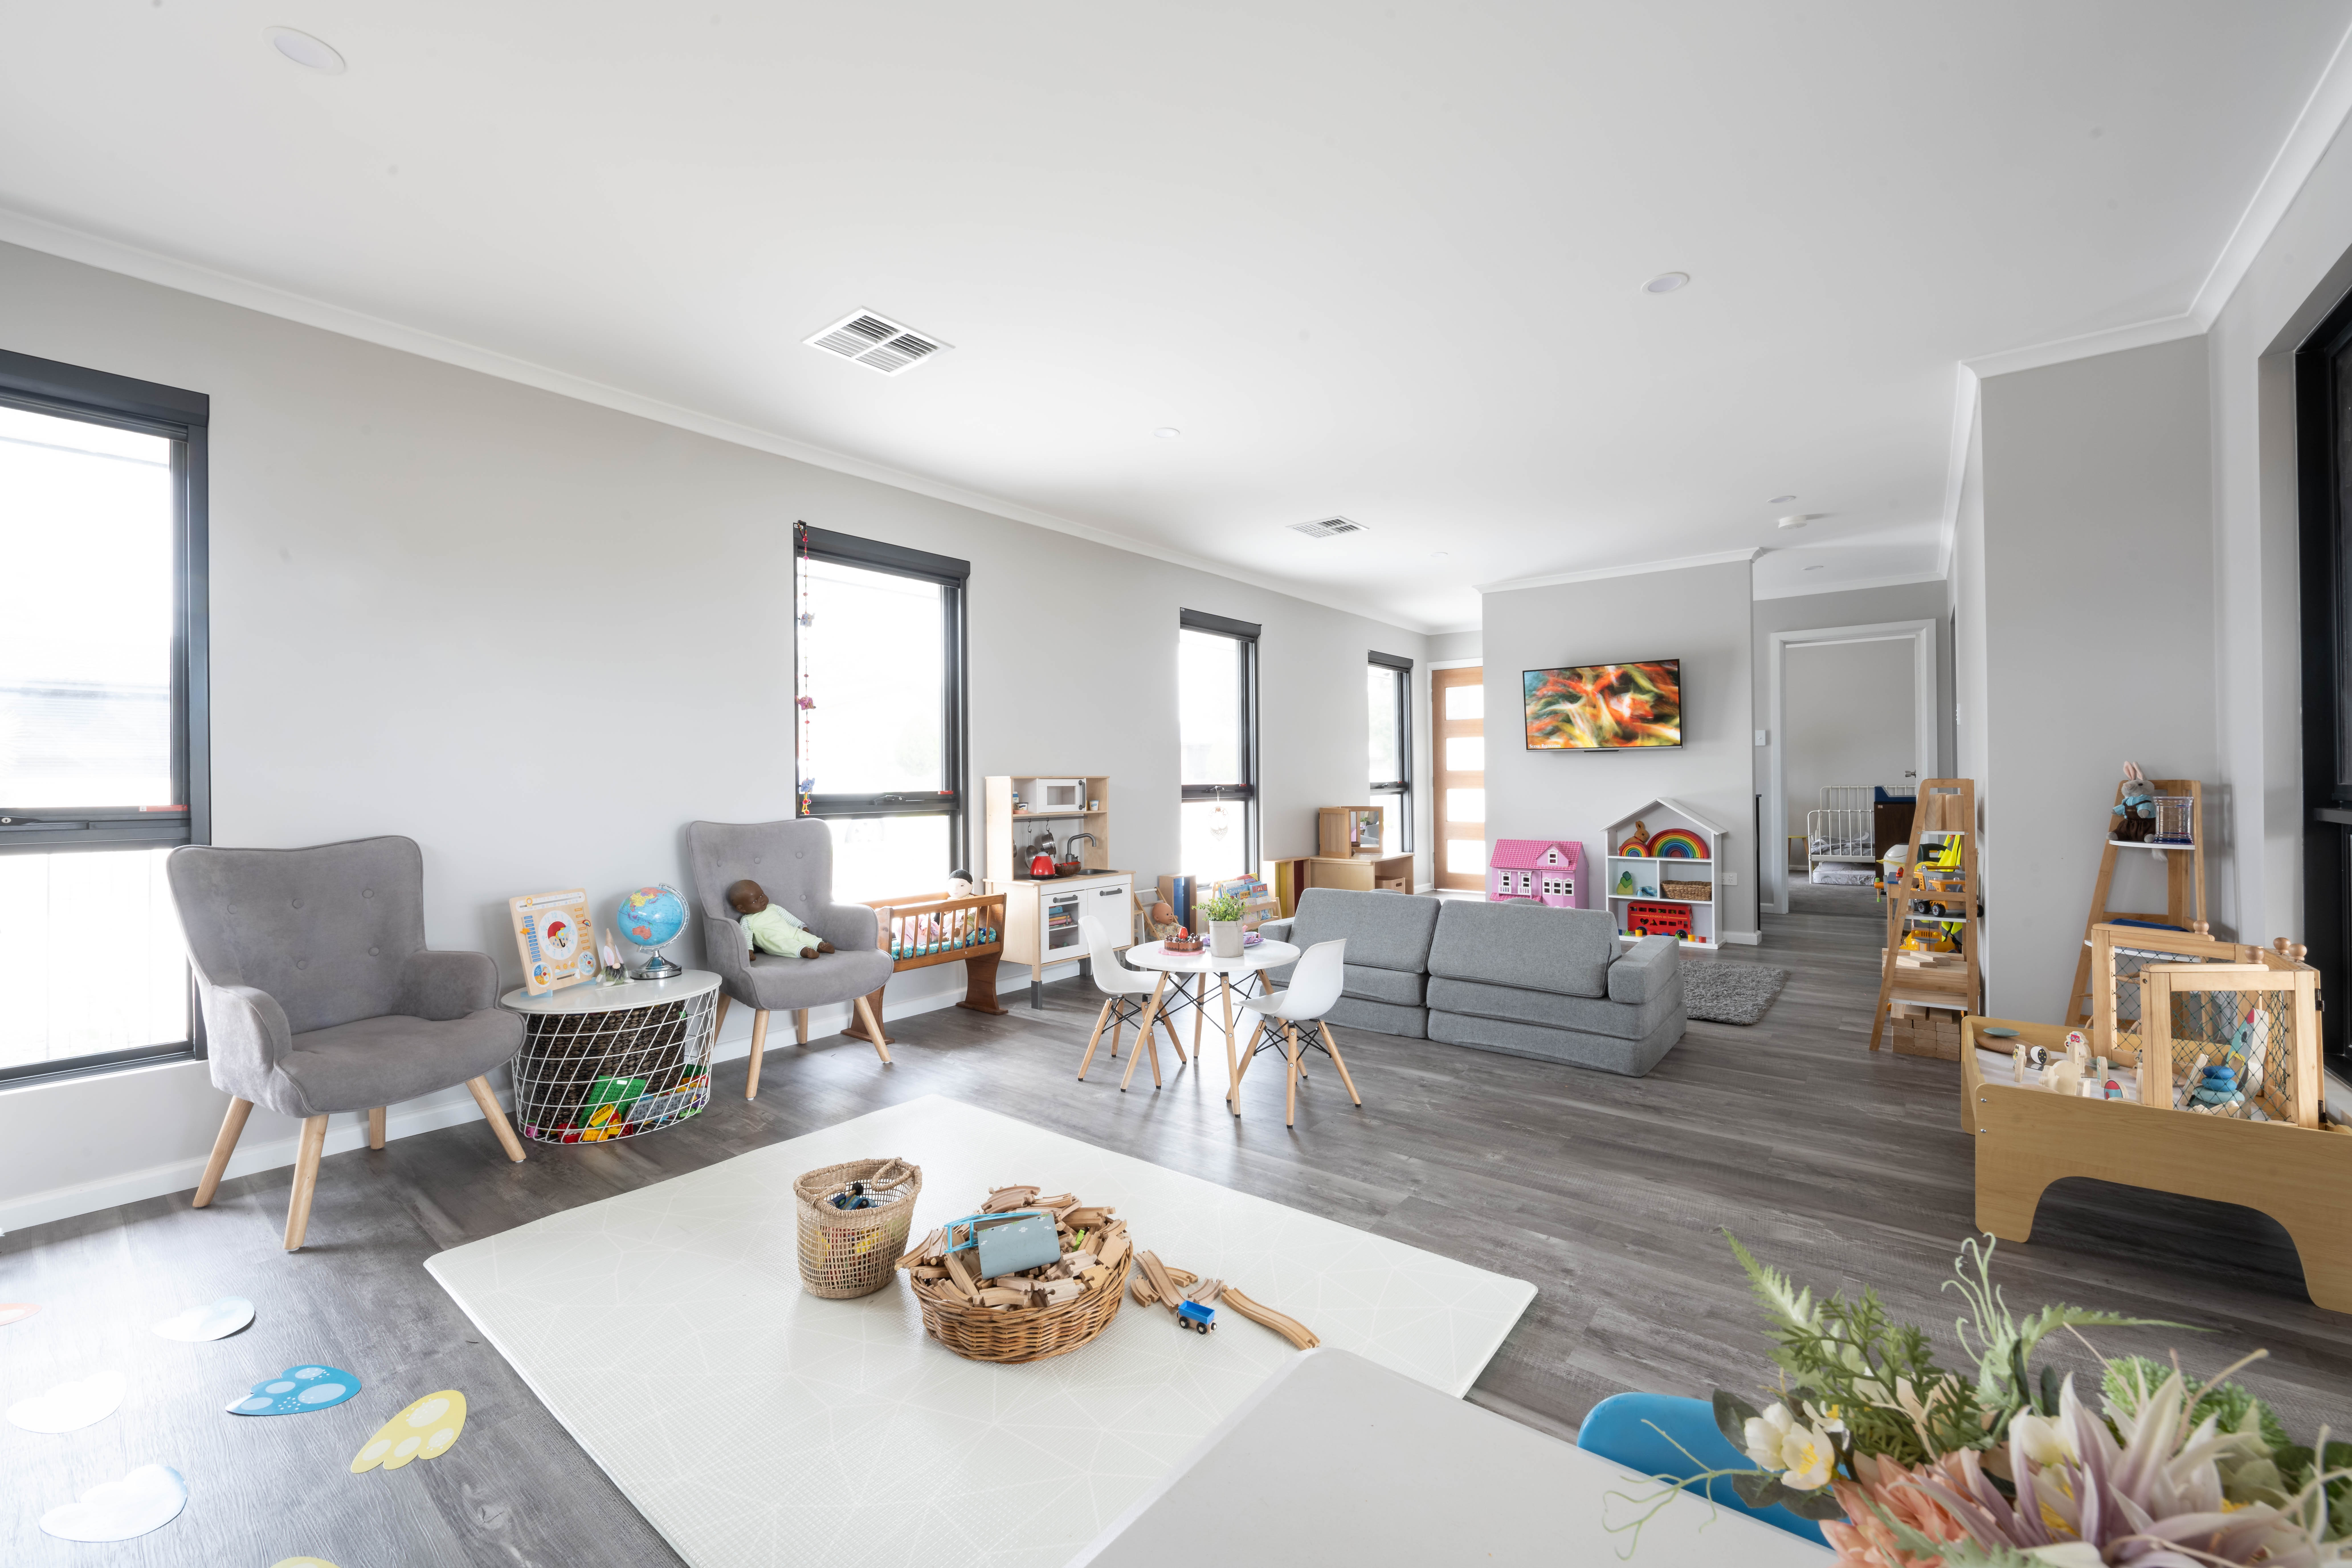 family day care setting – inside lounge and play area